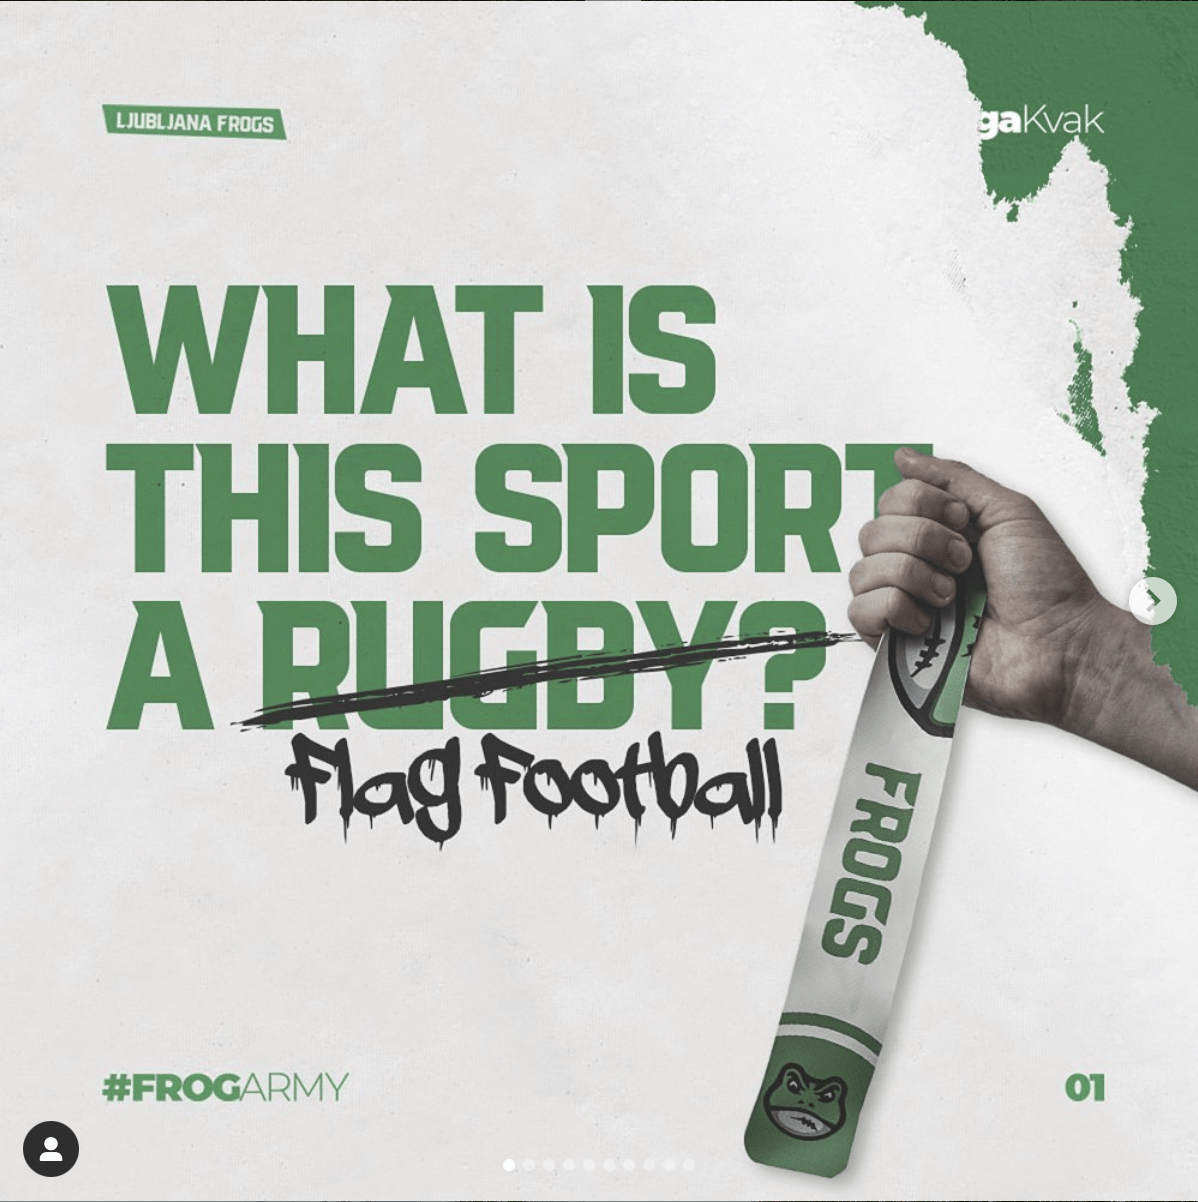 Why is flag football different of rugby?